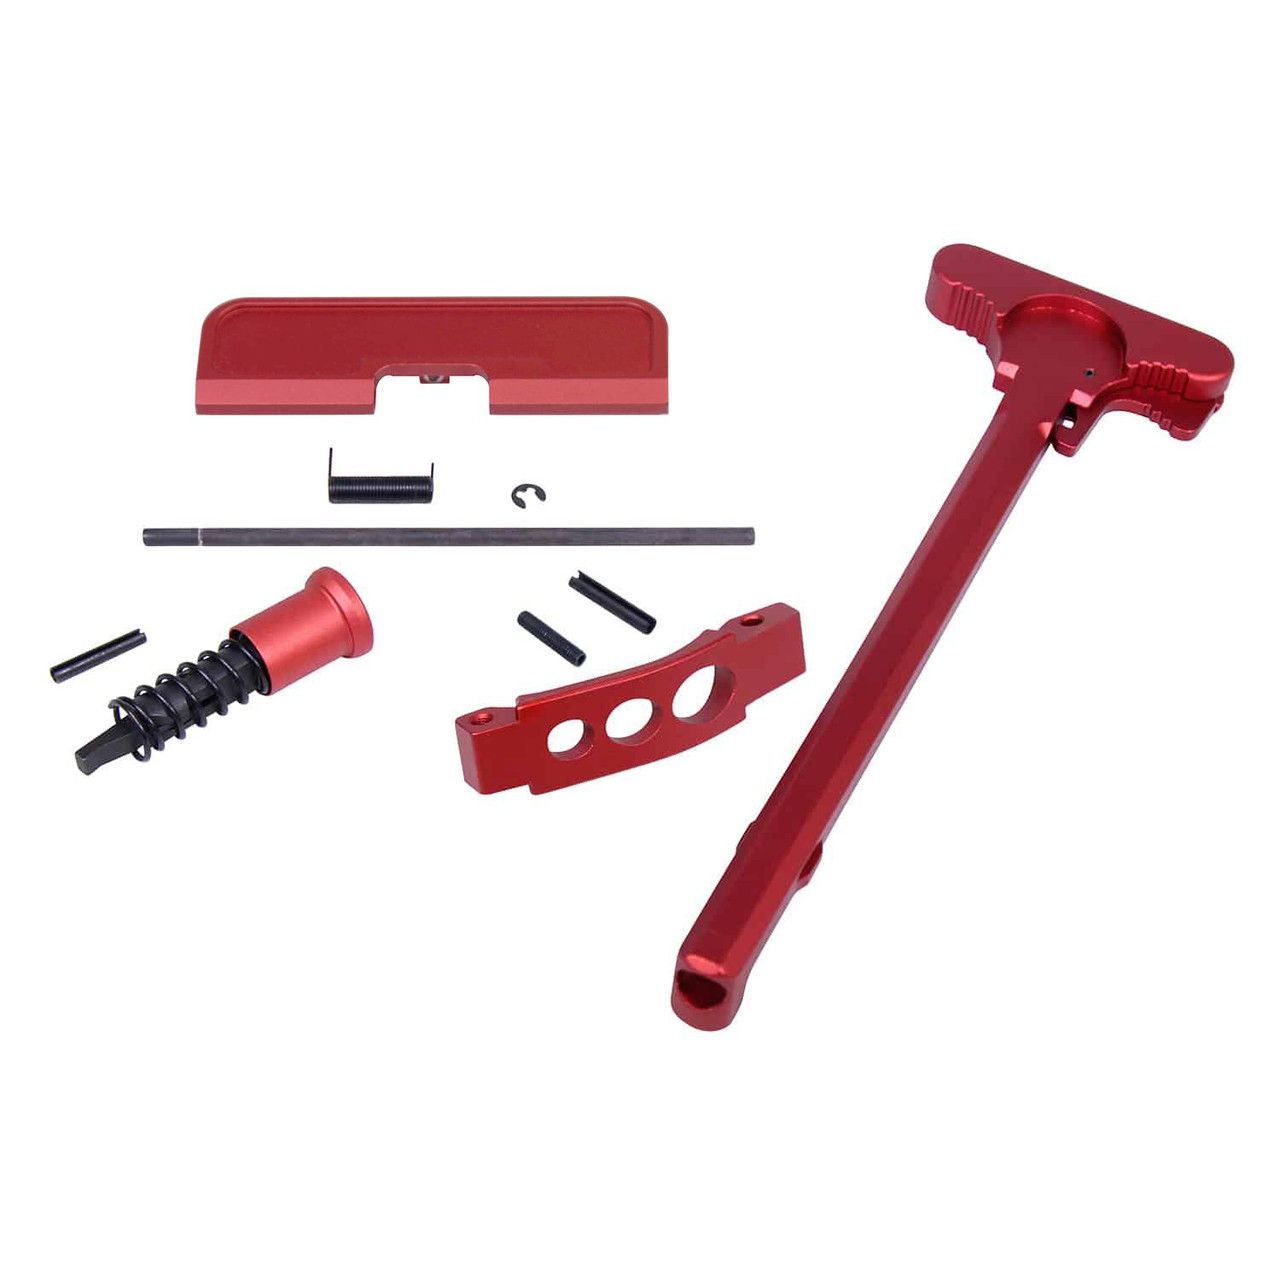 Guntec USA ARCH-KIT-RED AR-15 Receiver Build Kit W/ Charging Handle (Anodized Red)